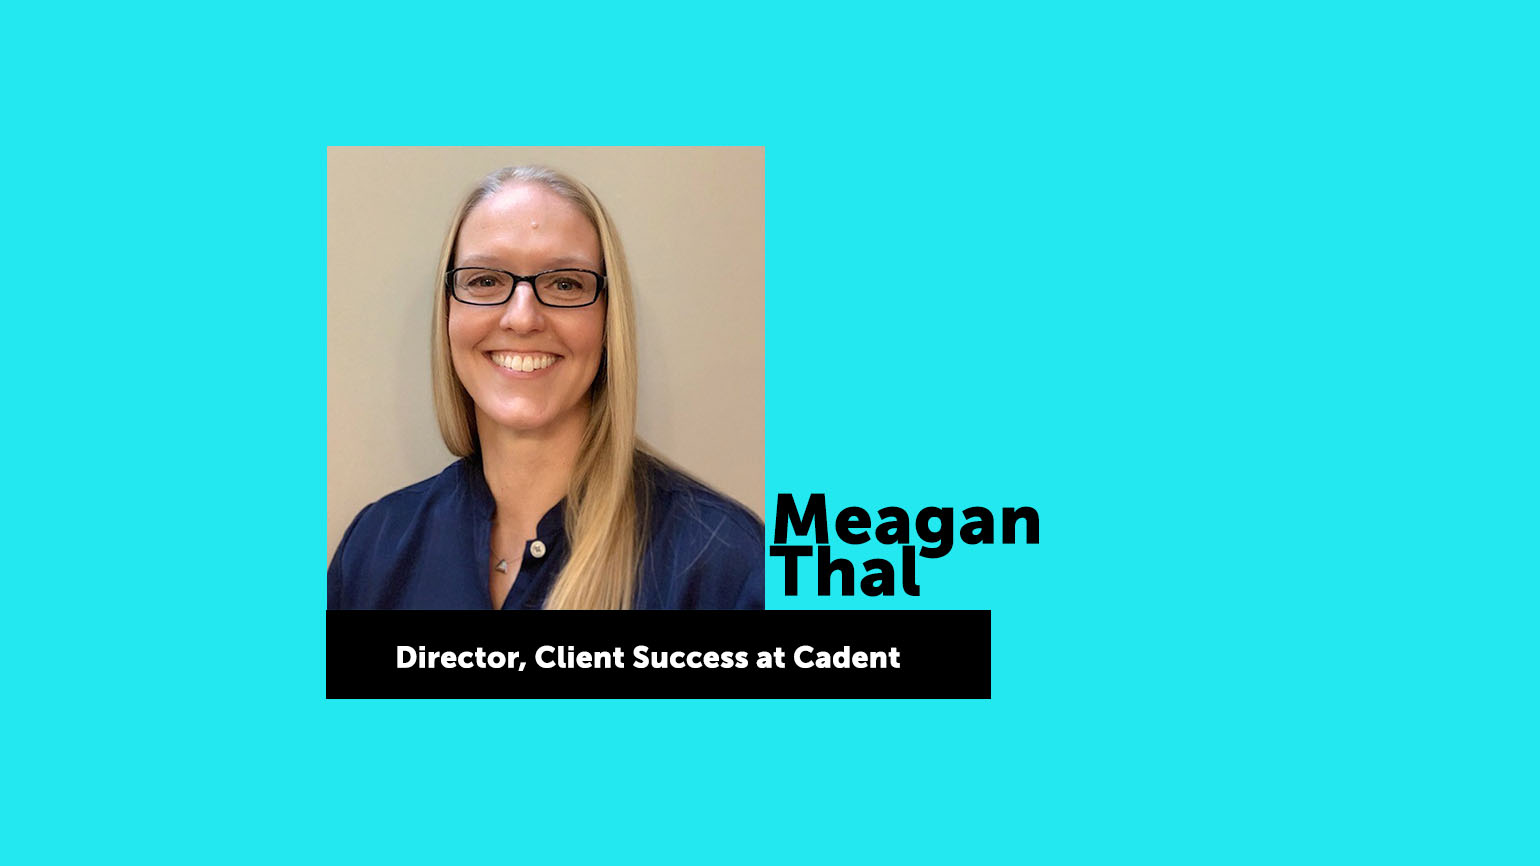 Life at Cadent: Meagan Thal, Director of Client Success